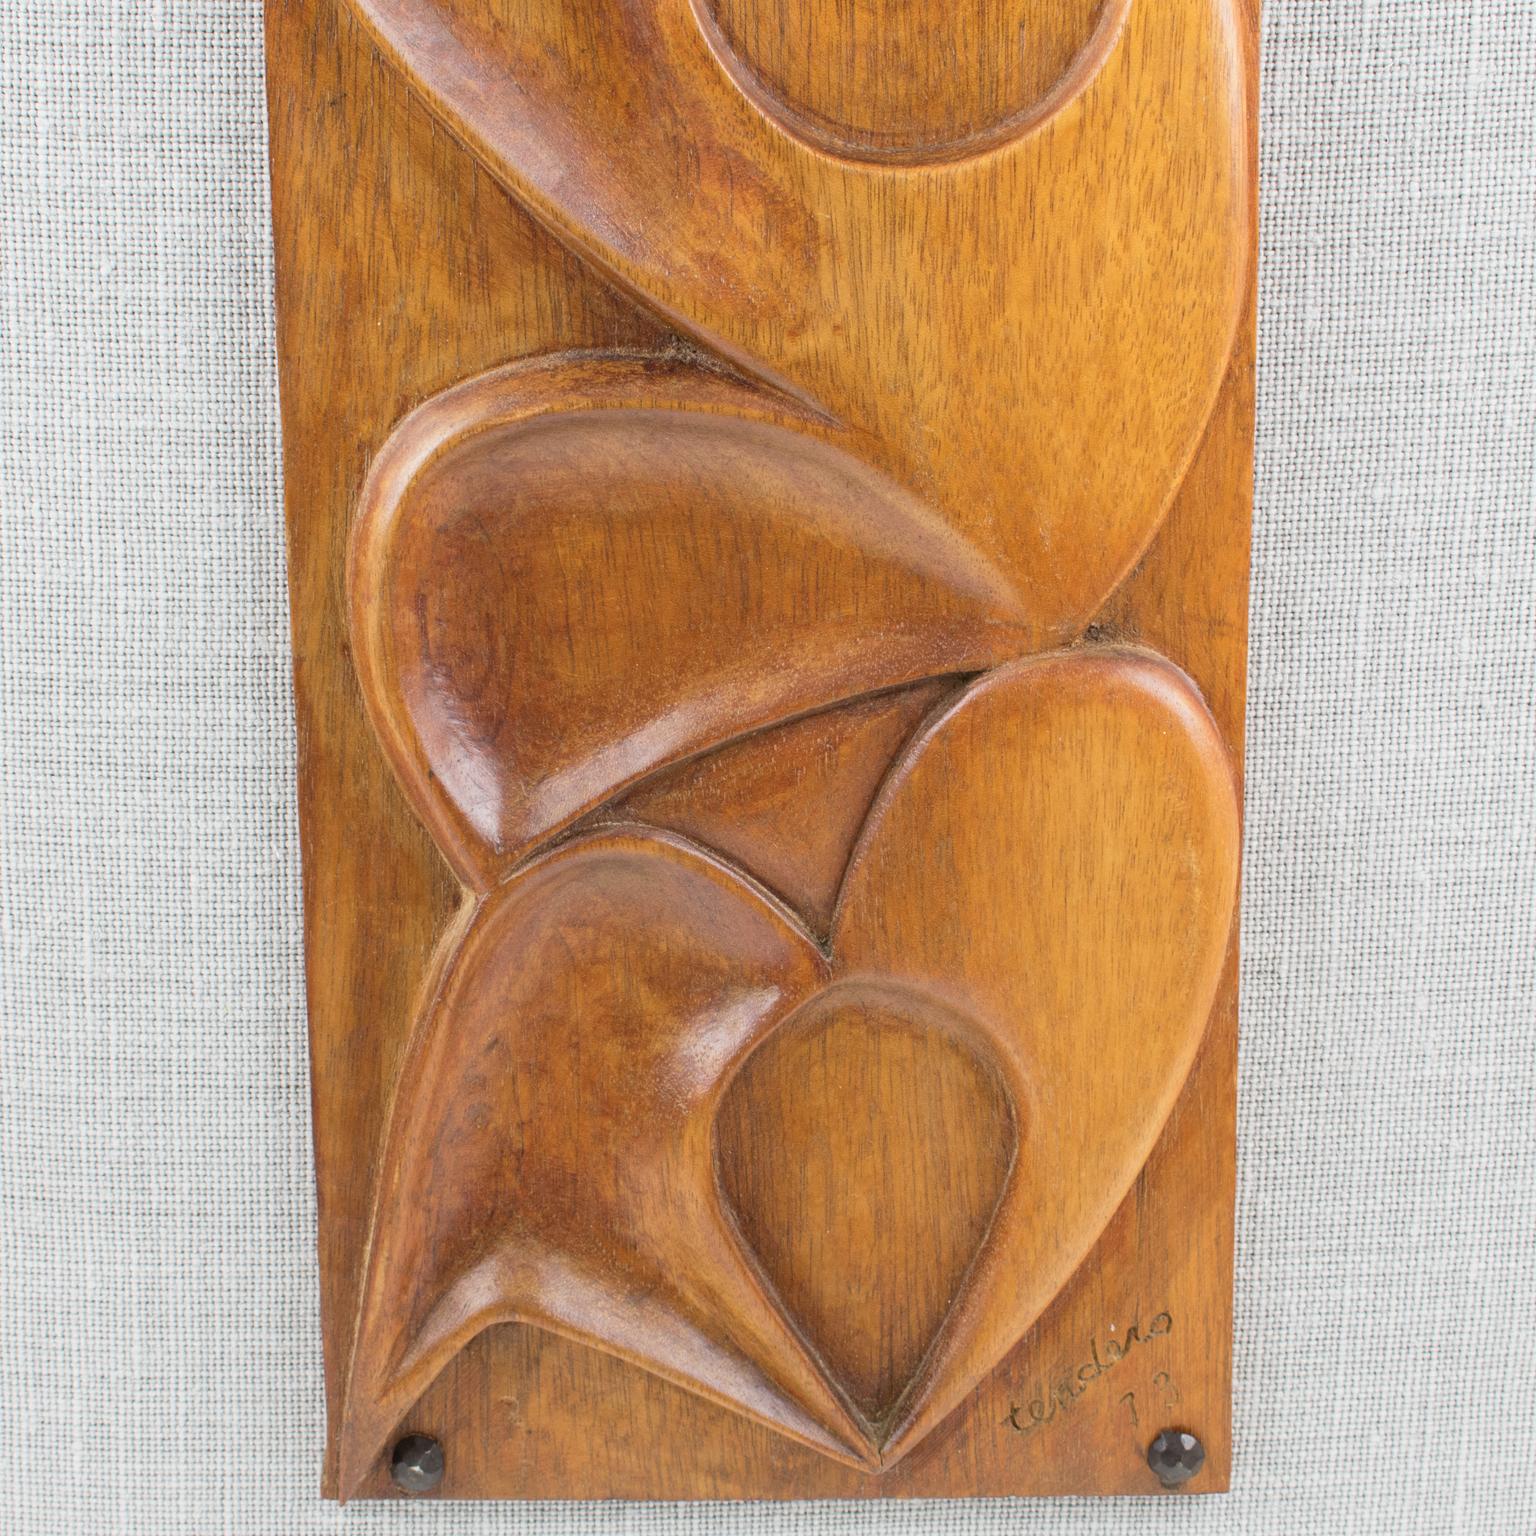 Abstract Wooden Wall-Mounted Art Sculpture Panel by Maxime Tendero For Sale 8